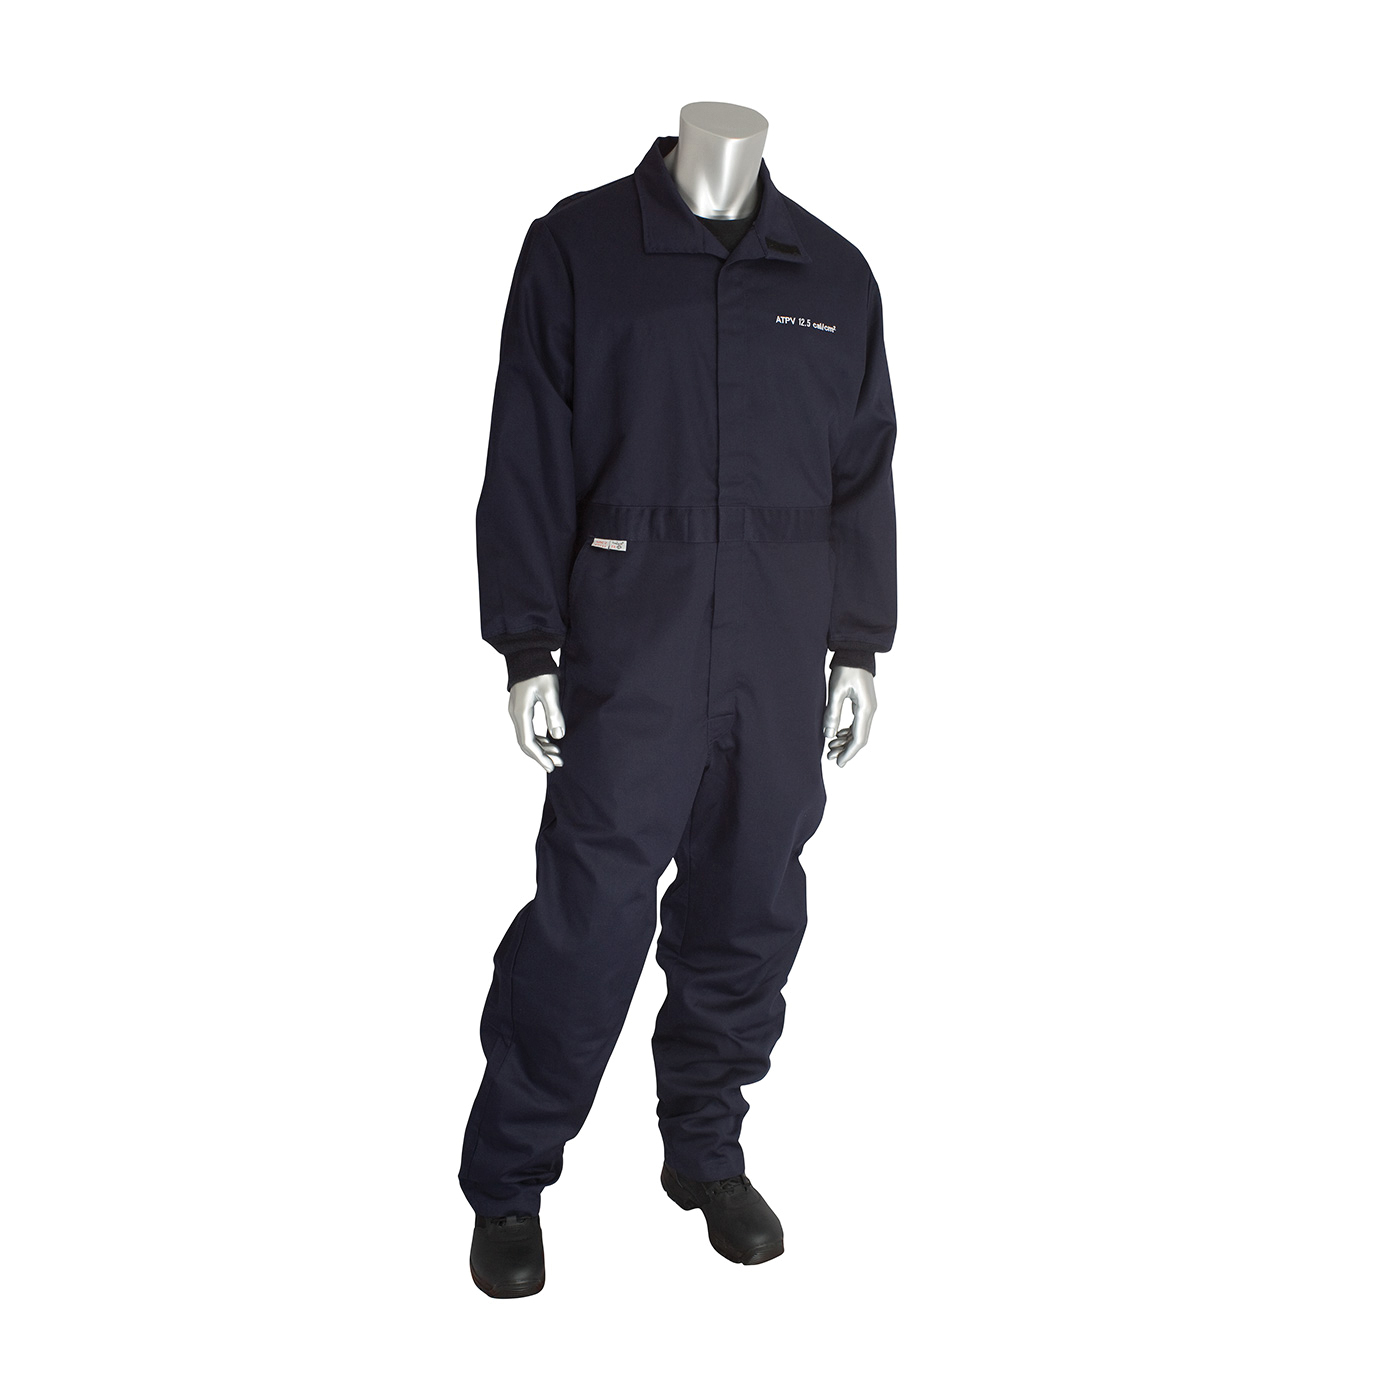 PIP® 9100-2170D/M Flame Resistant Coverall, M, Navy, 90% Cotton/10% Nylon/FR Twill Weave, 40 to 42 in Chest, 32 in L Inseam